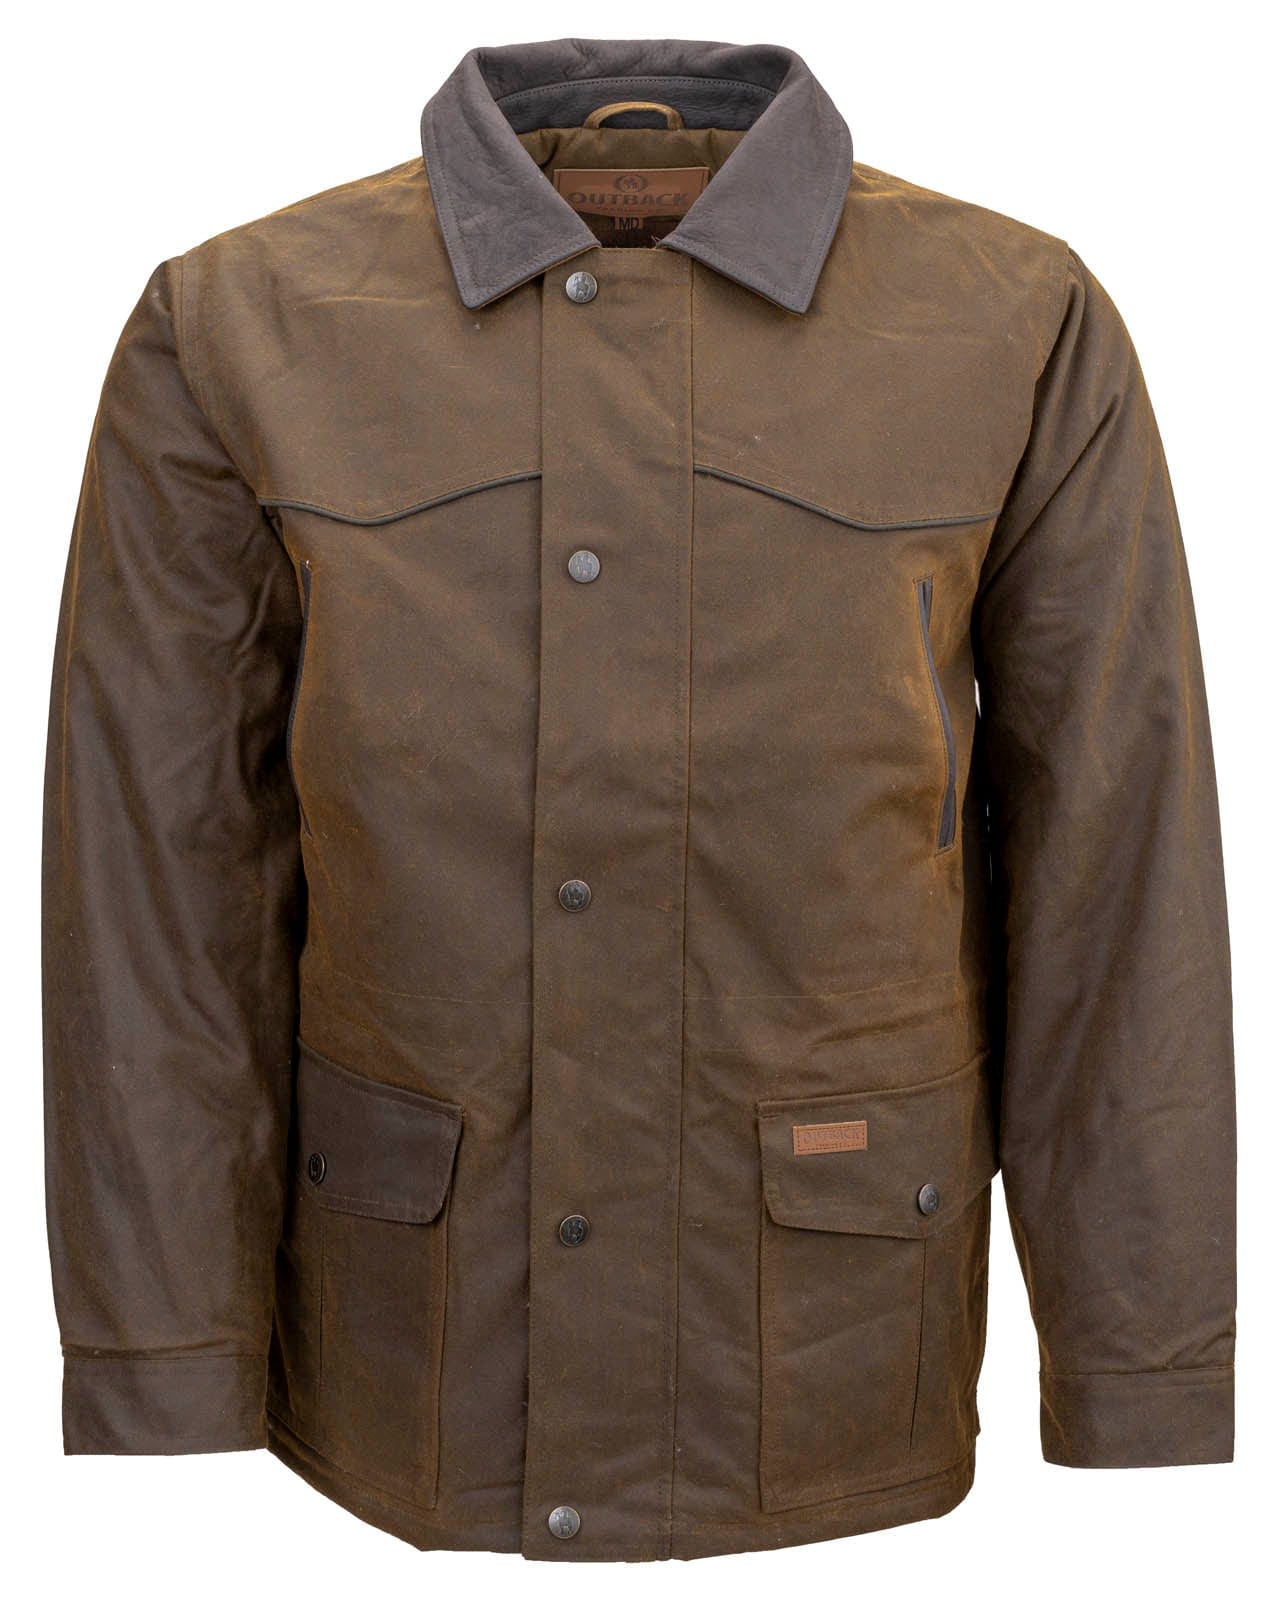 Men's Pathfinder Jacket | Jackets by Outback Trading Company 